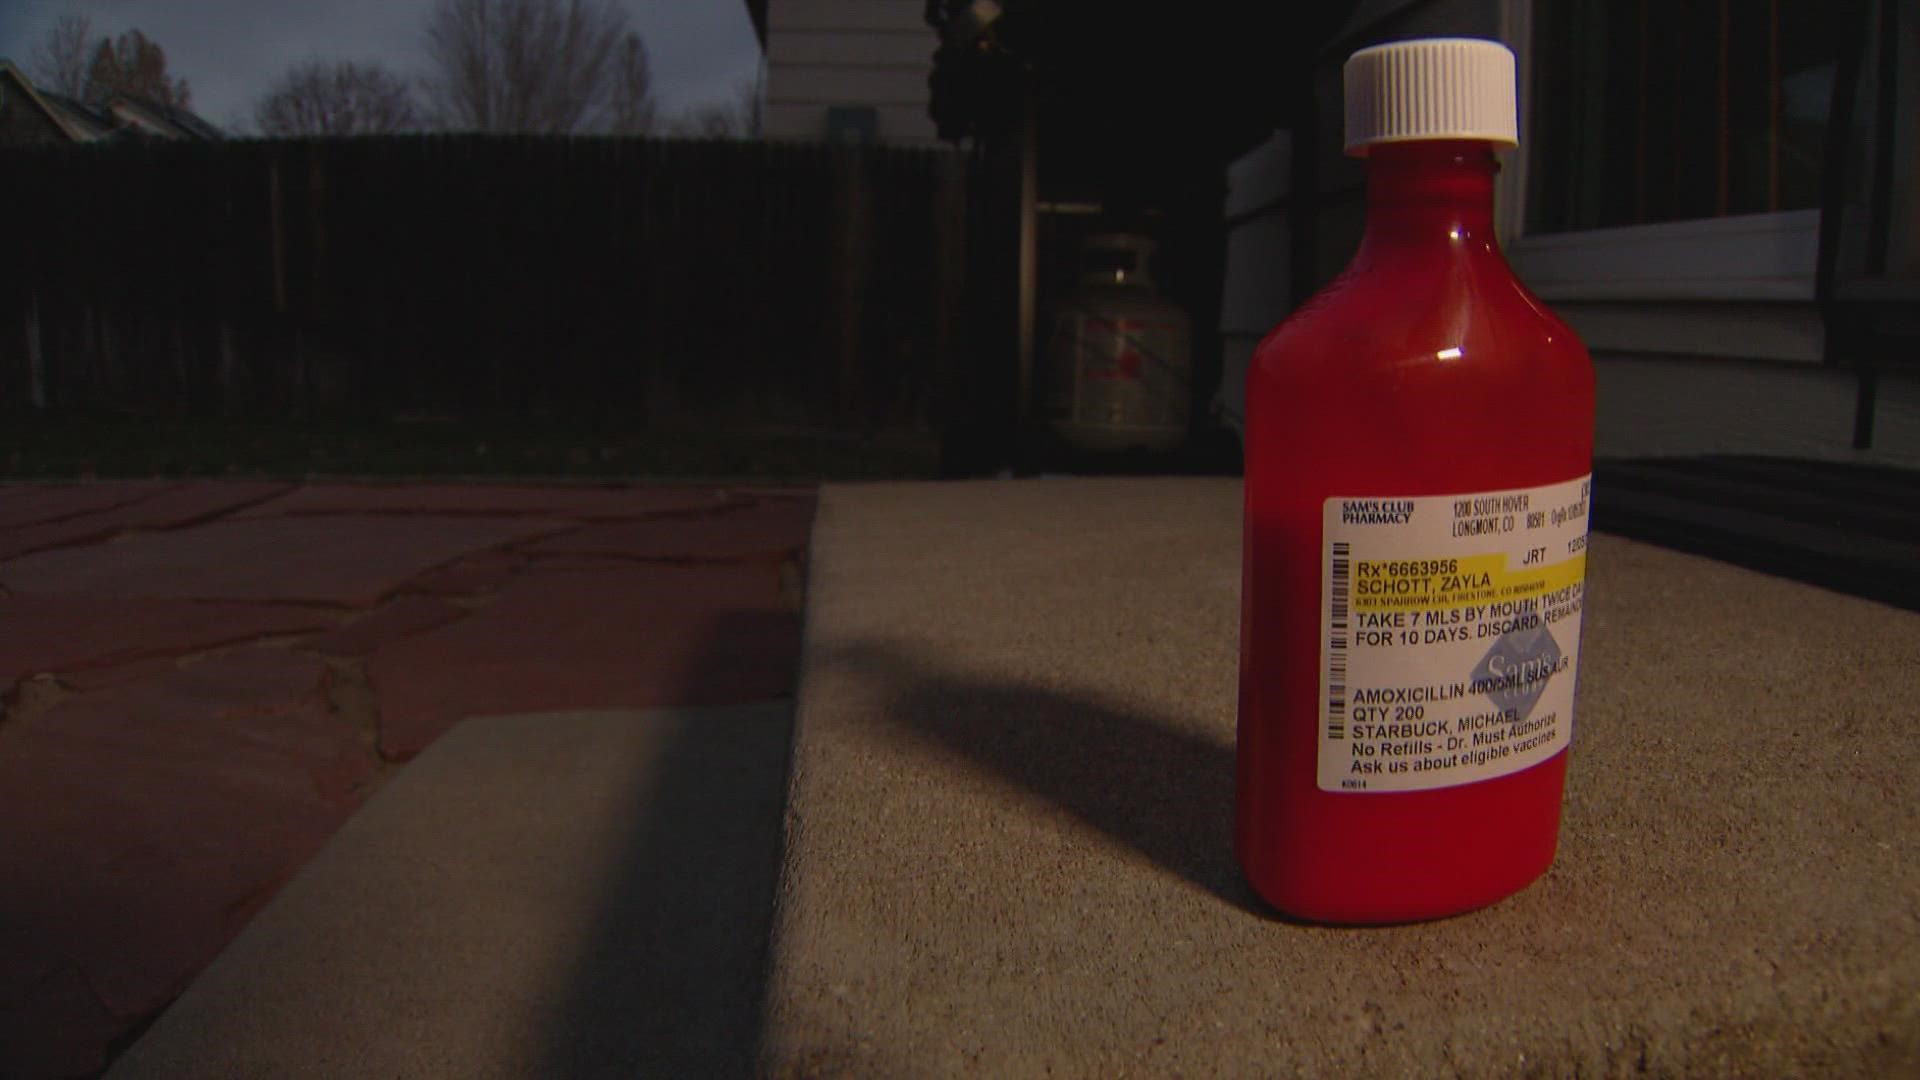 There is a nationwide shortage of amoxicillin, a commonly-used antibiotic.